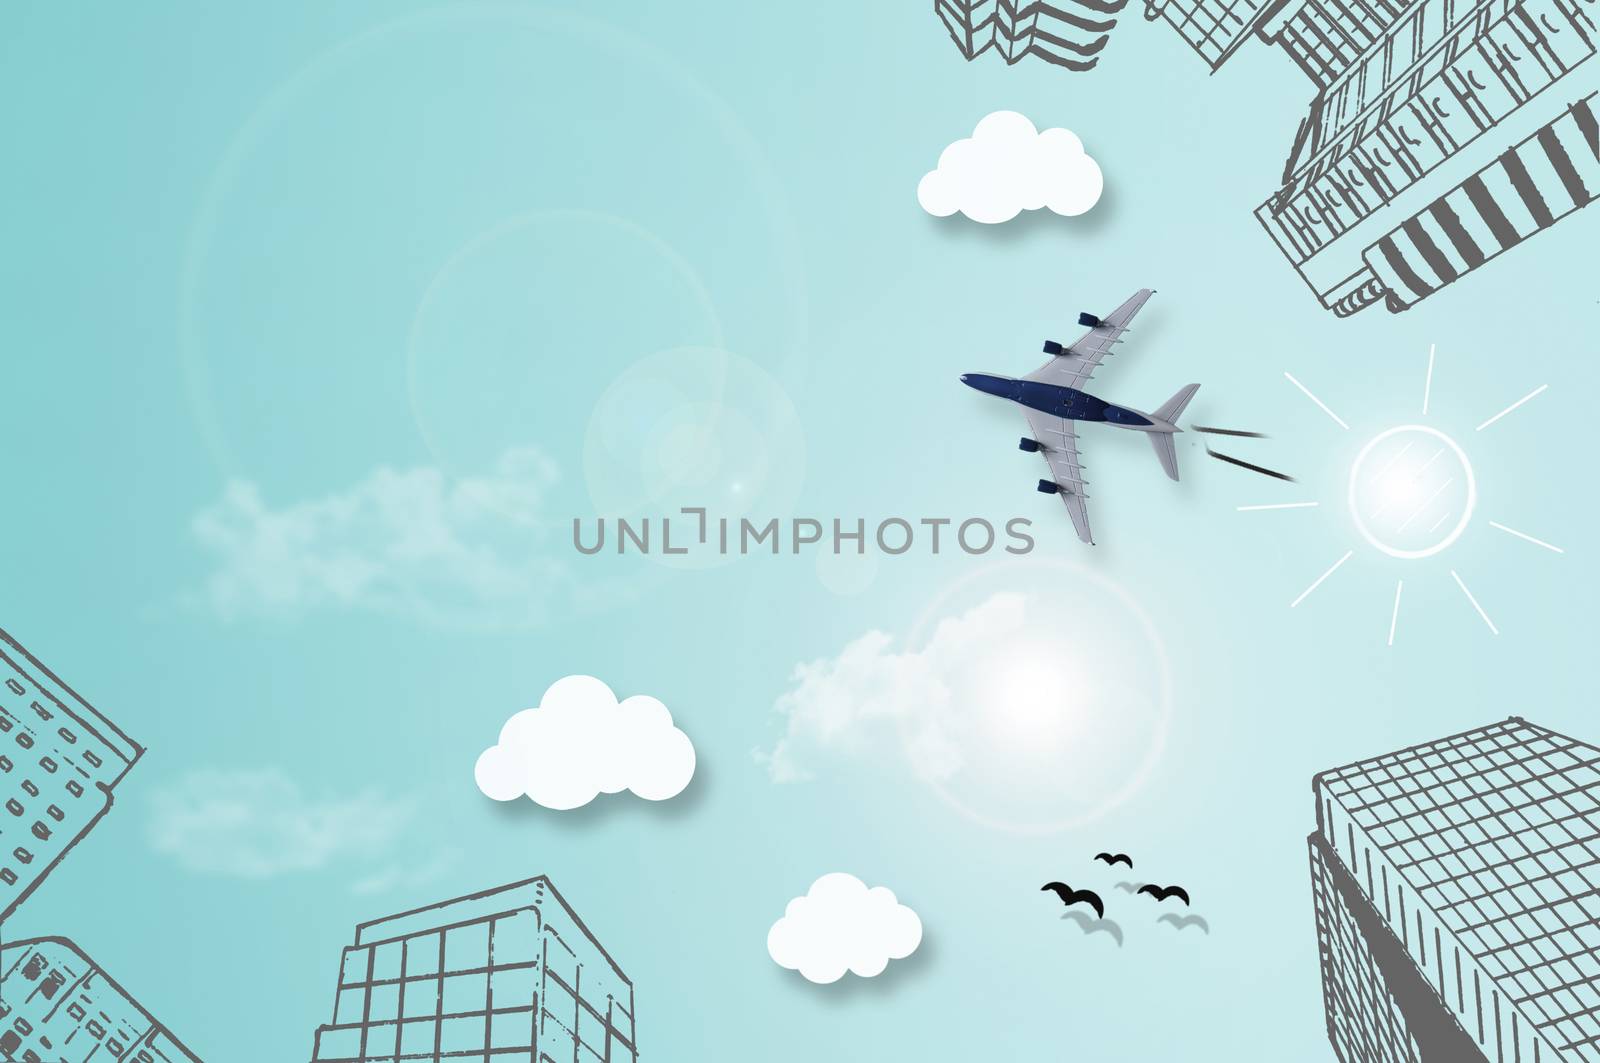 Sketch of city high rise buildings, with cloud icons and plane flying through the sky